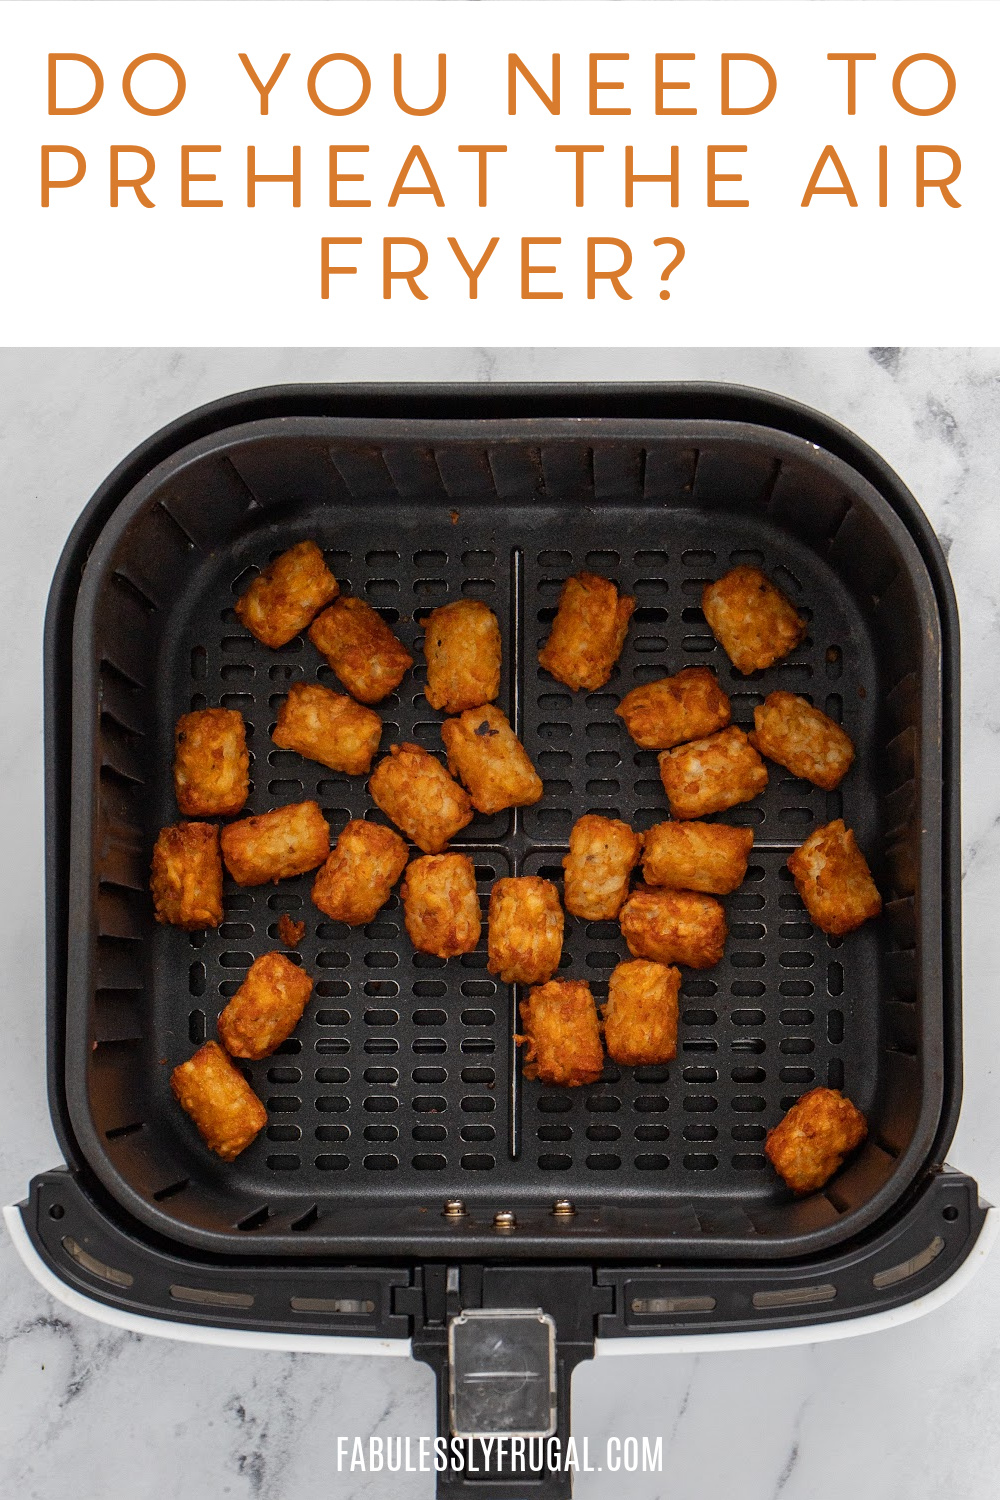 https://fabulesslyfrugal.com/wp-content/uploads/2023/02/everything-you-need-to-know-about-preheating-the-air-fryer-1.jpg